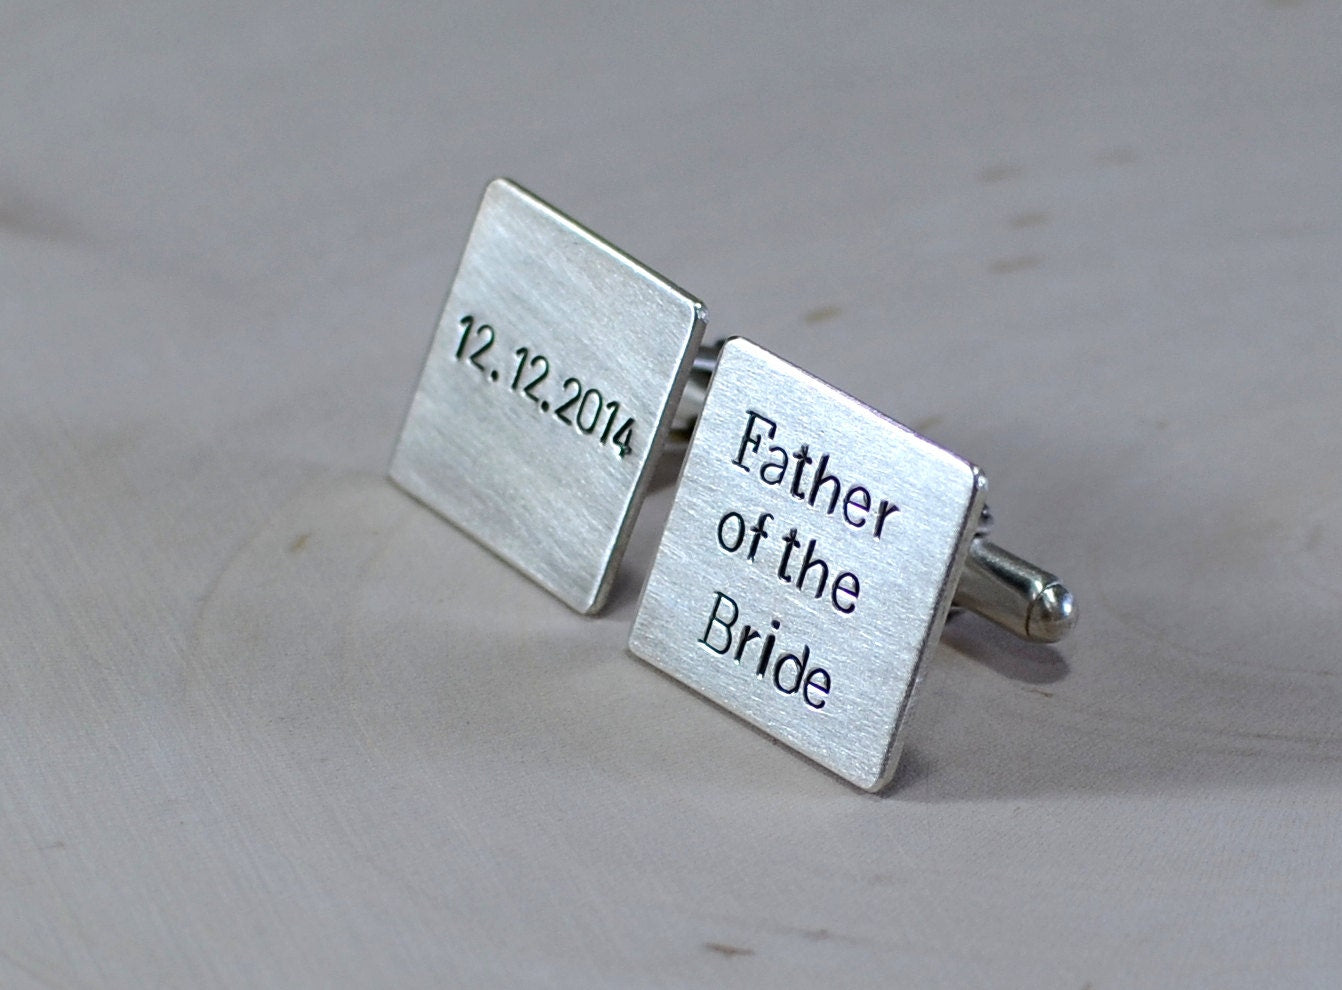 Father of the bride square cuff links in sterling silver